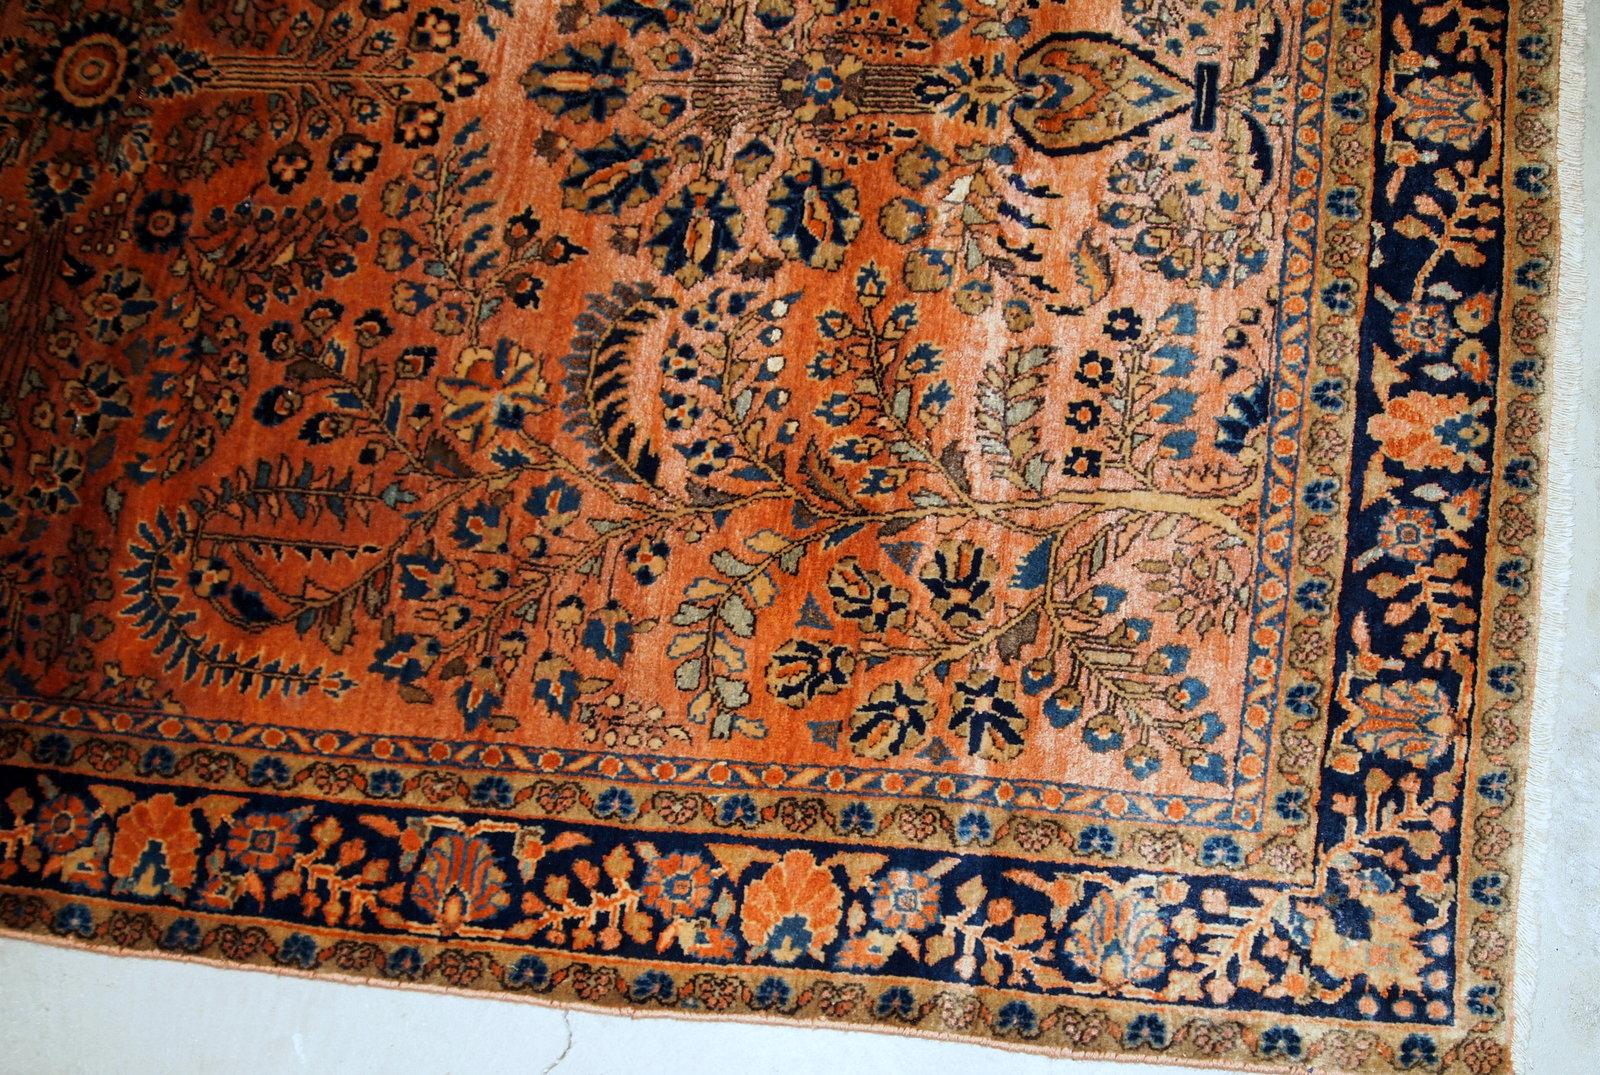 Handmade antique Sarouk rug in original good condition. The rug has been made in the beginning of 20th century in pale red wool.

- Condition: original good,

- circa 1920s.

- Size: 4' x 6.8' (122cm x 195cm),

- Material: wool,

- Country